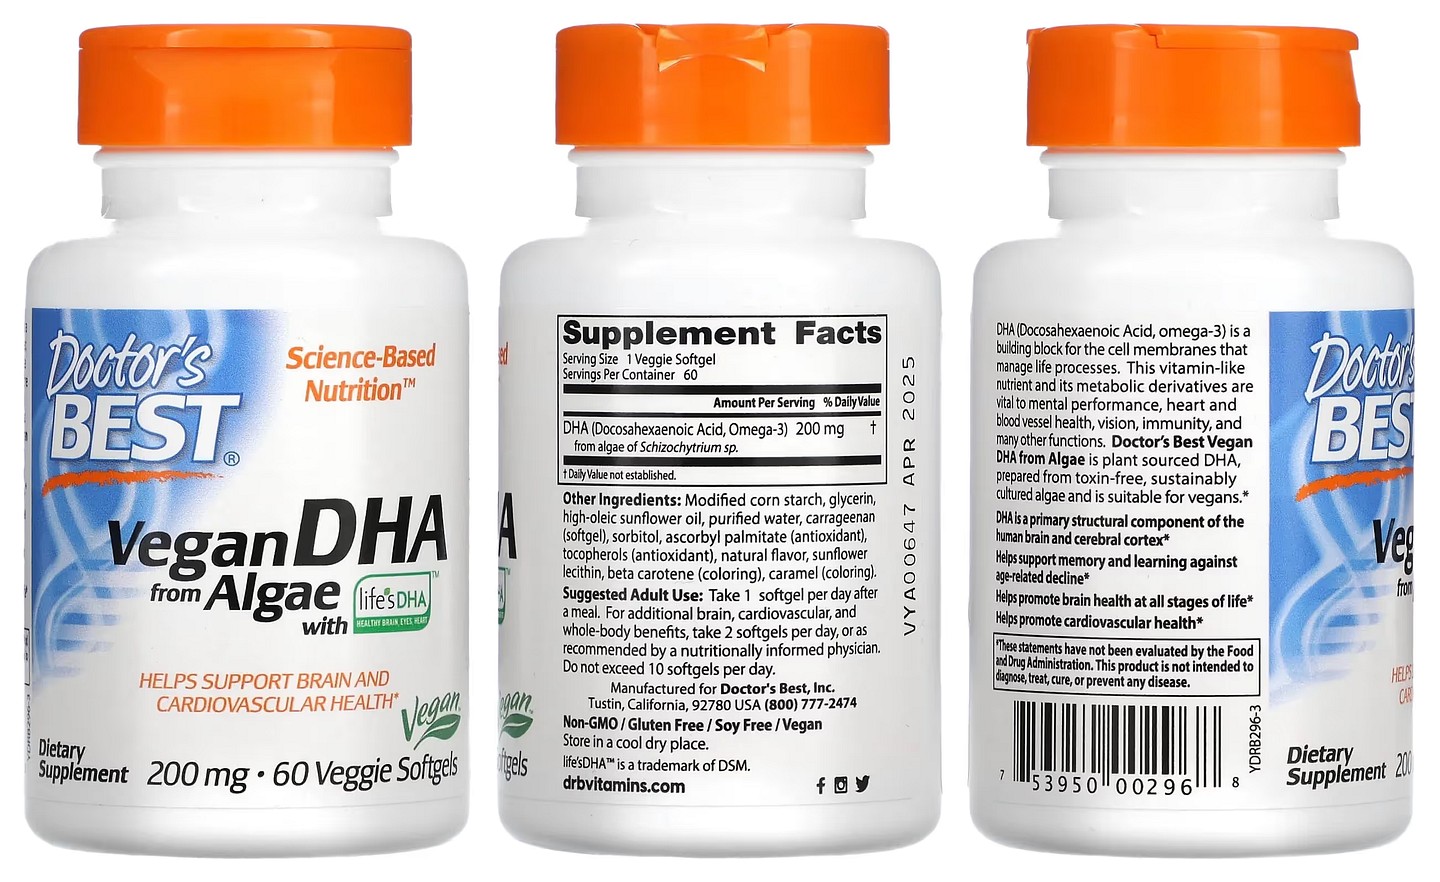 Doctor's Best, Vegan DHA from Algae with Life's DHA packaging